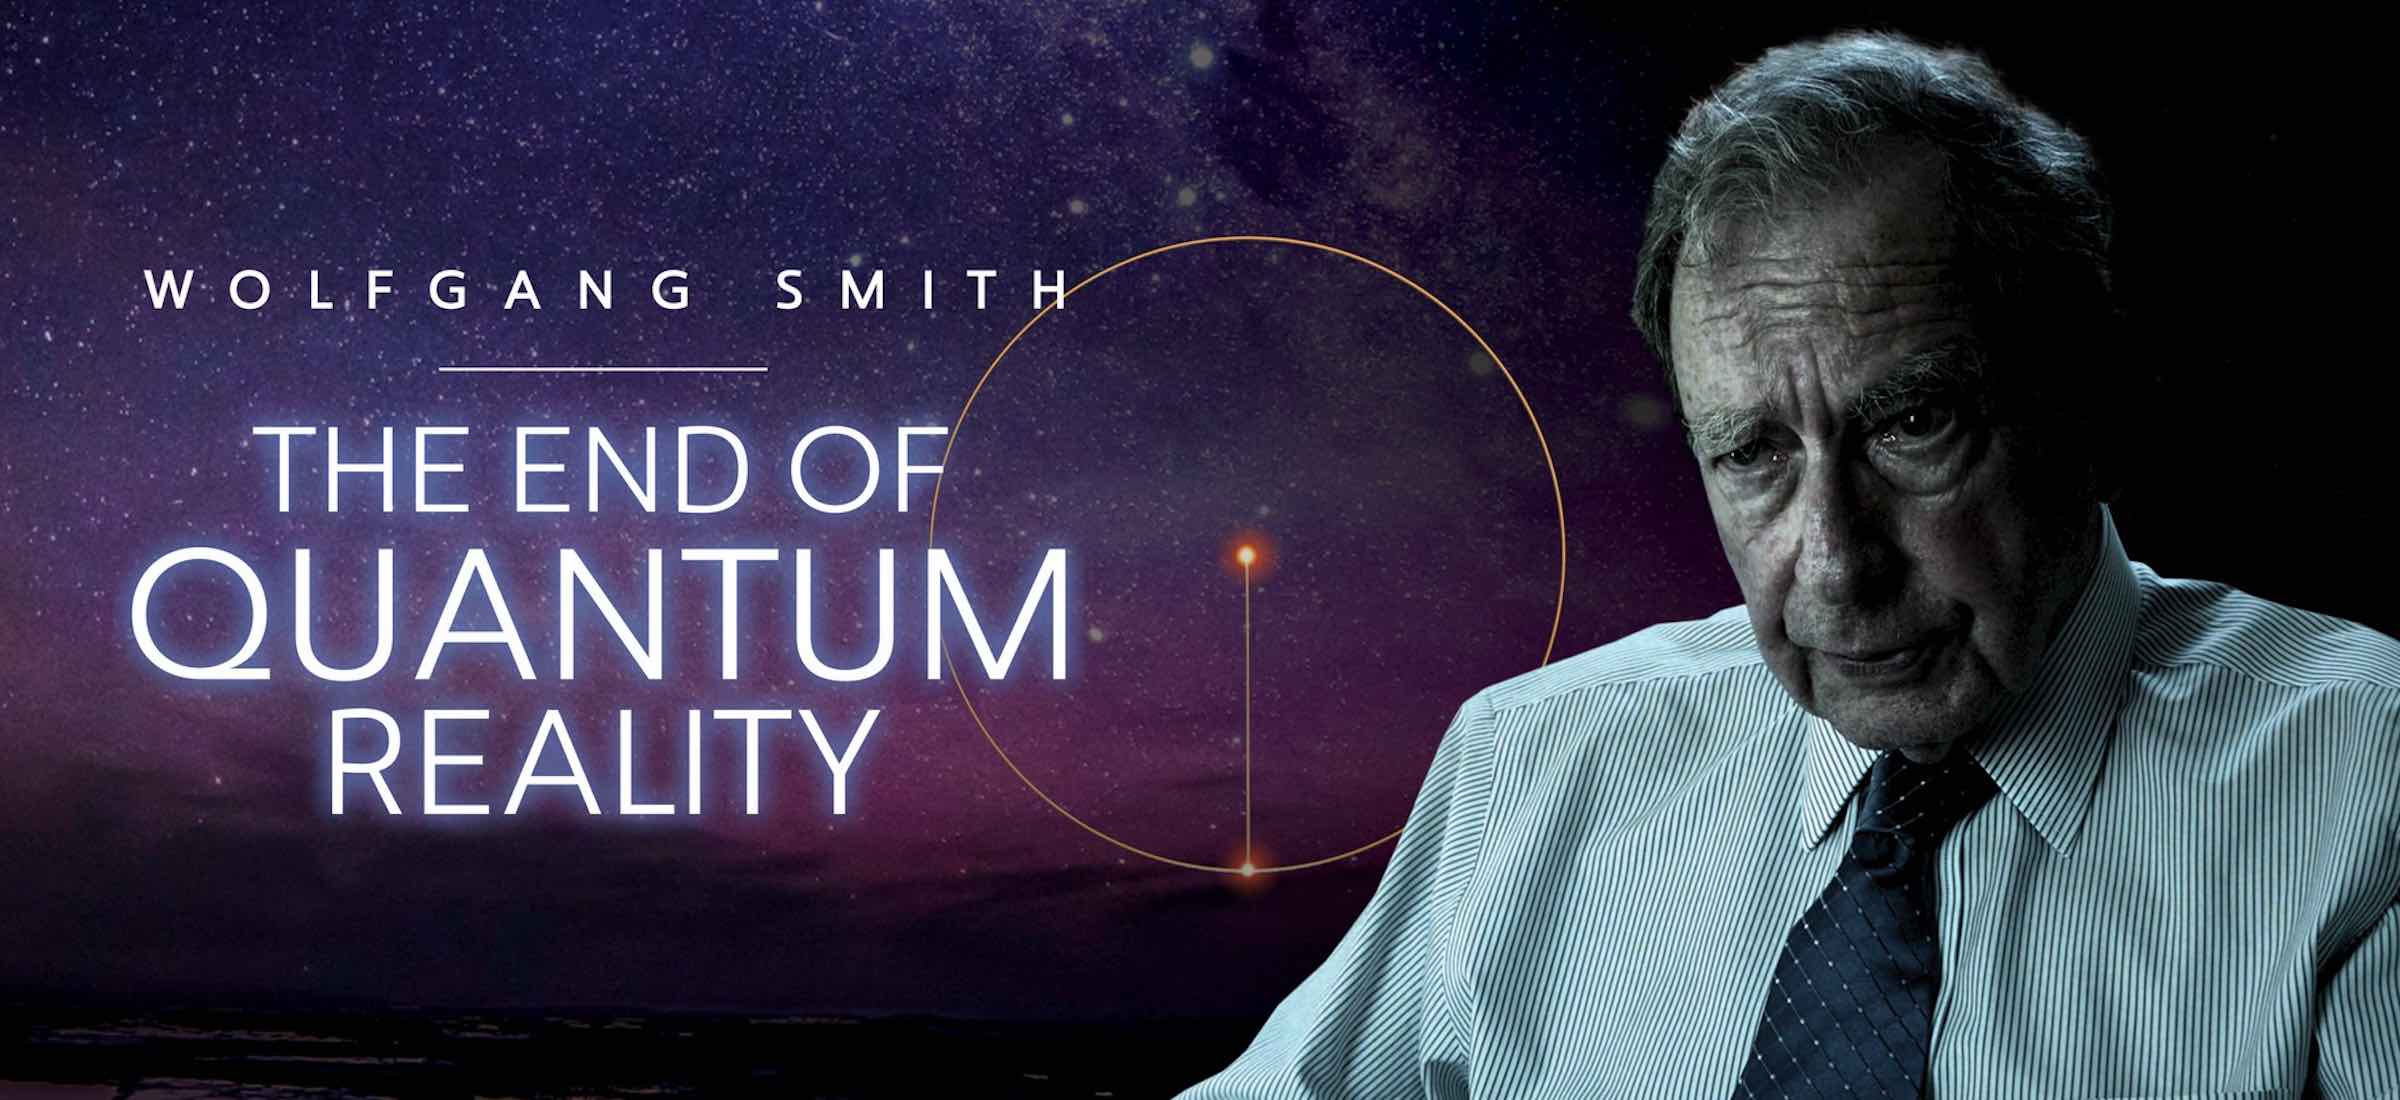 Rick DeLano’s film, 'The End of Quantum Reality' once again brings us closer to the work of some of the greatest minds. Here's our interview with DeLano.